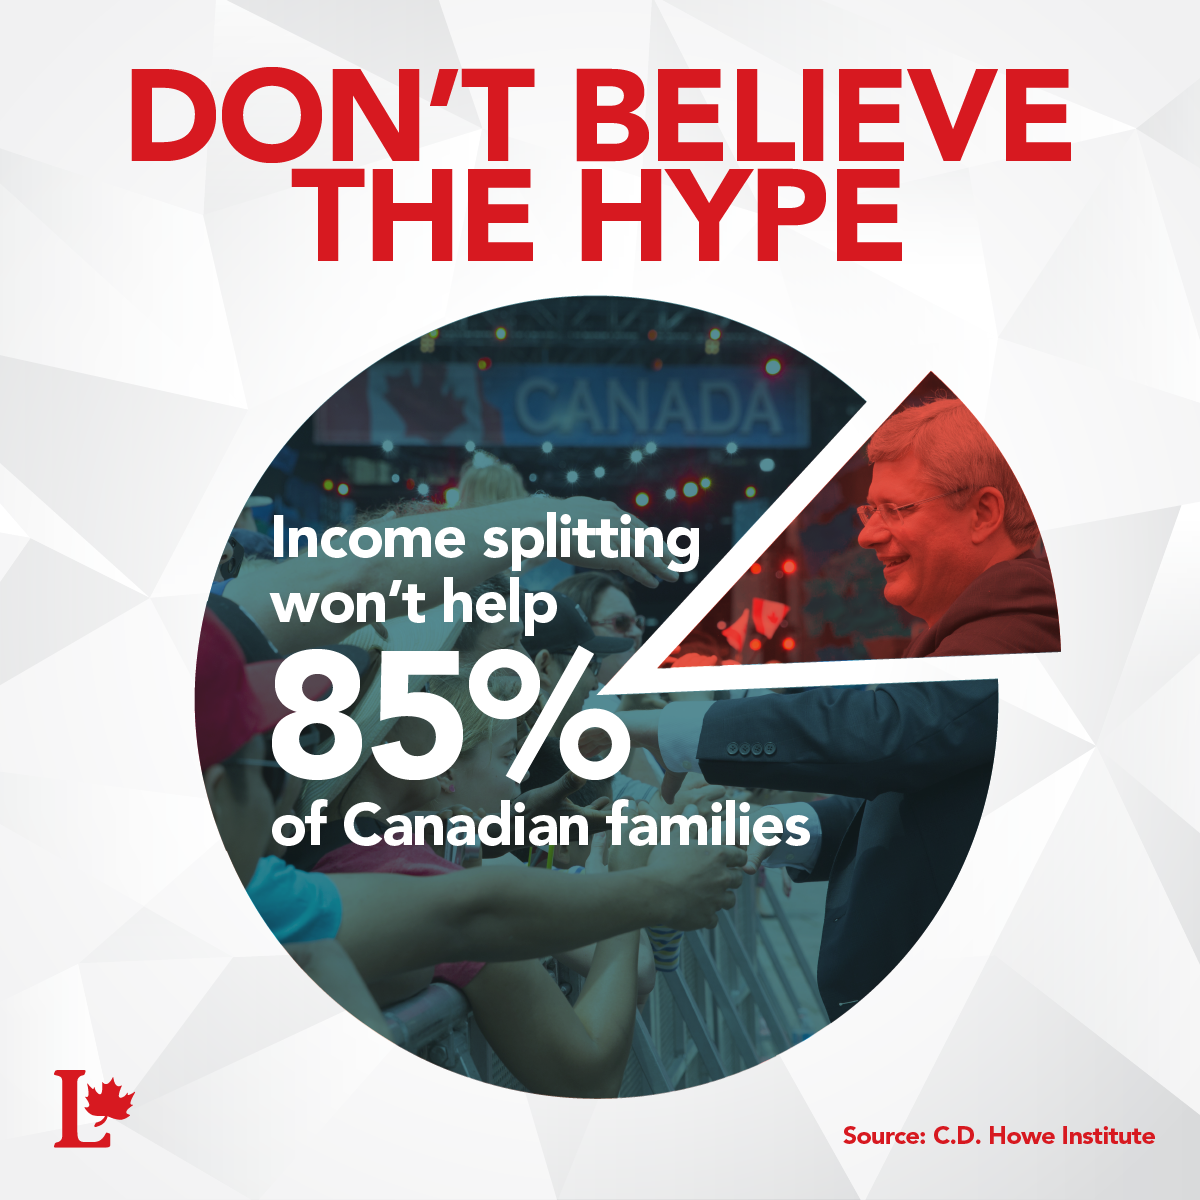 Don't believe the hype– income splitting won't help 85% of Canadian families.